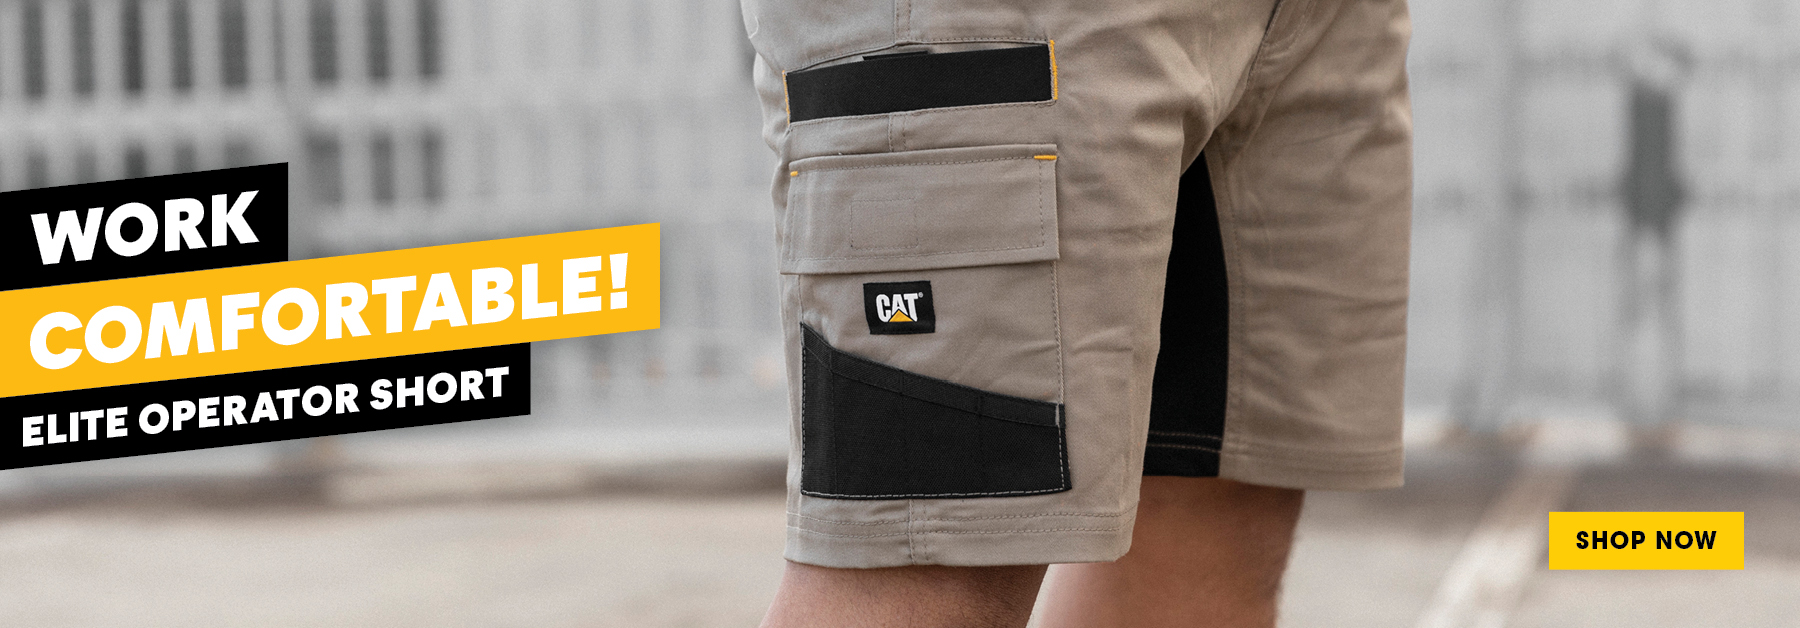 CAT Workwear at RSEA Saftey - The Safety Experts!